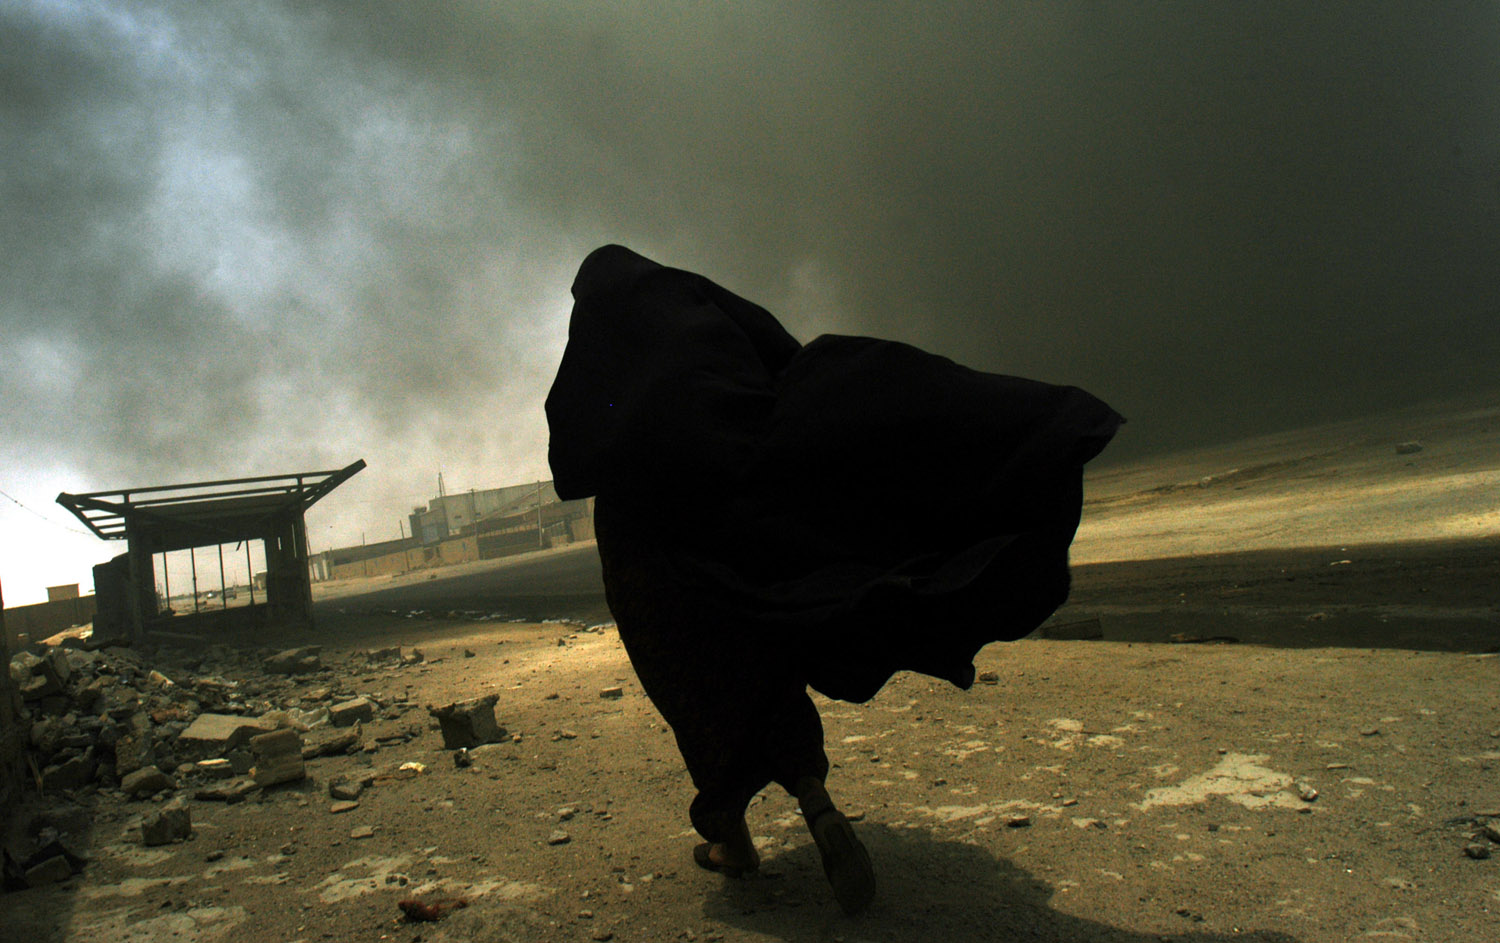 An Iraqi woman walks through a plume of smoke rising from a massive fire at a liquid gas factory as she searches for her husband in the vicinity of the fire in Basra, Iraq, May 26, 2003.  The fire was allegedly started by looters picking through the factory, and residents in the vicinity feared the explosion of the four liquid gas tanks on the premisis.   Weeks after the end of the war, looting continues to be one of the main problems for both Basra and Bagdad cities as coalition forces struggle to get life back to normal.  (Credit: Lynsey Addario/ Corbis Saba)